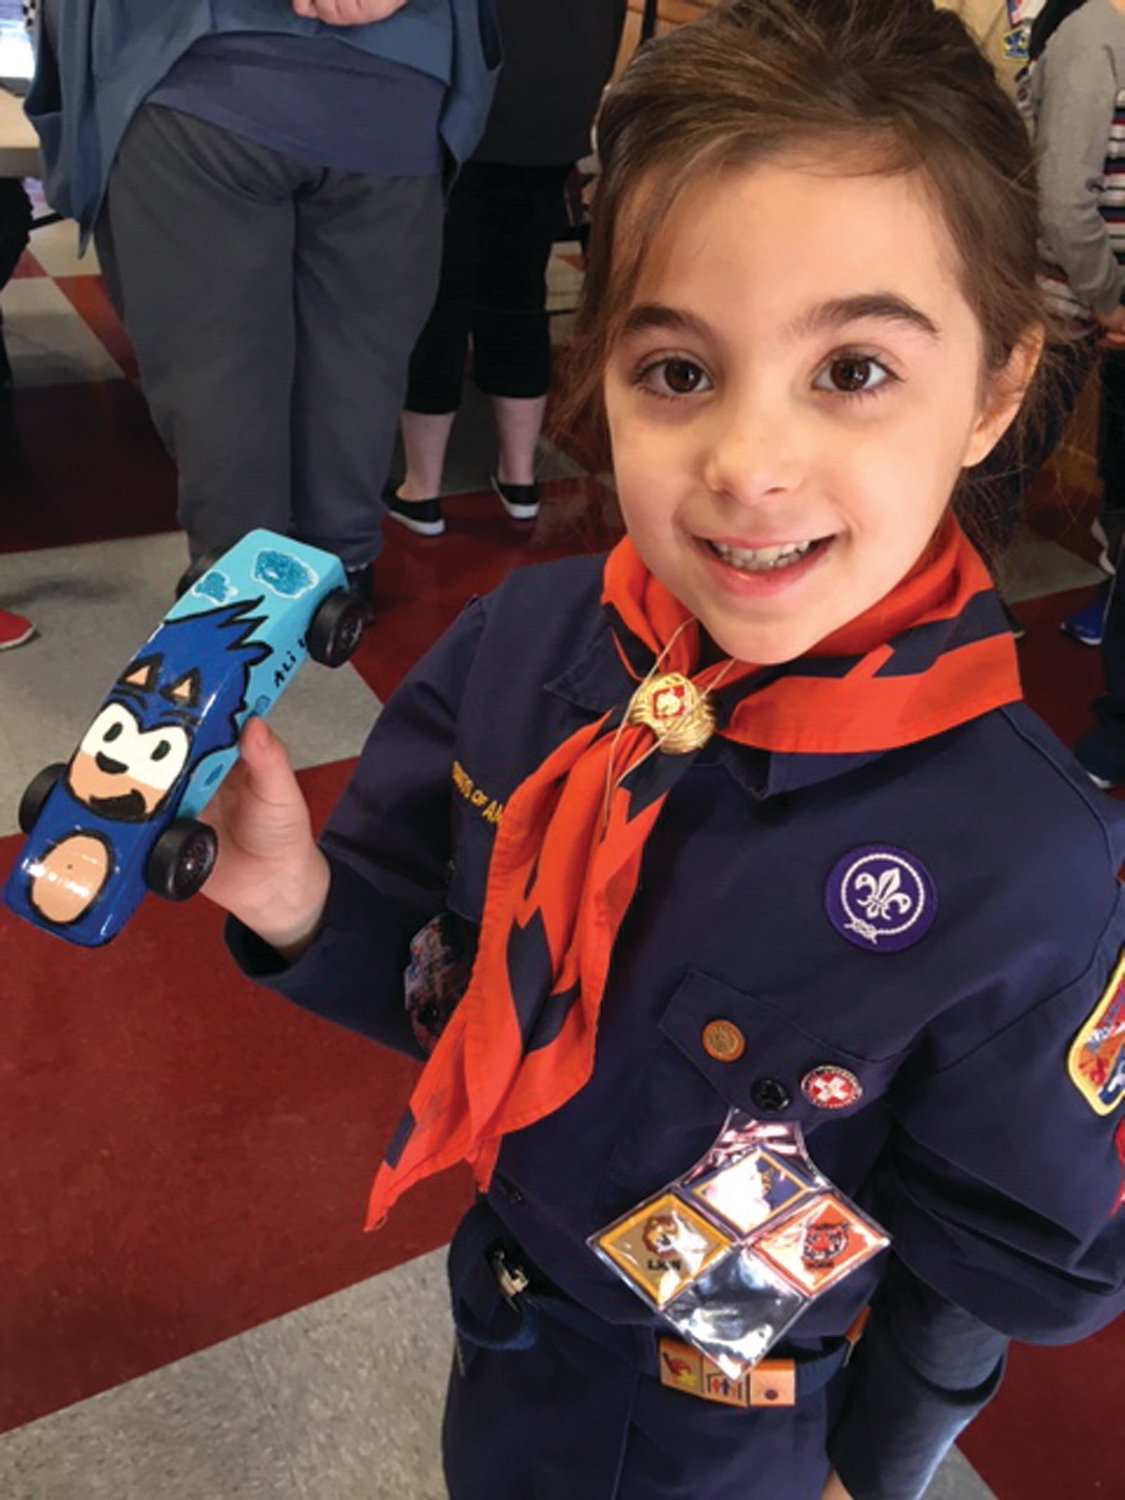 A PROUD PIONEER: Ali LaFazia, 7, shows off her award-winning car during last month’s Pinewood Derby Regionals. LaFazia is the first girl to ever compete at the tournament.